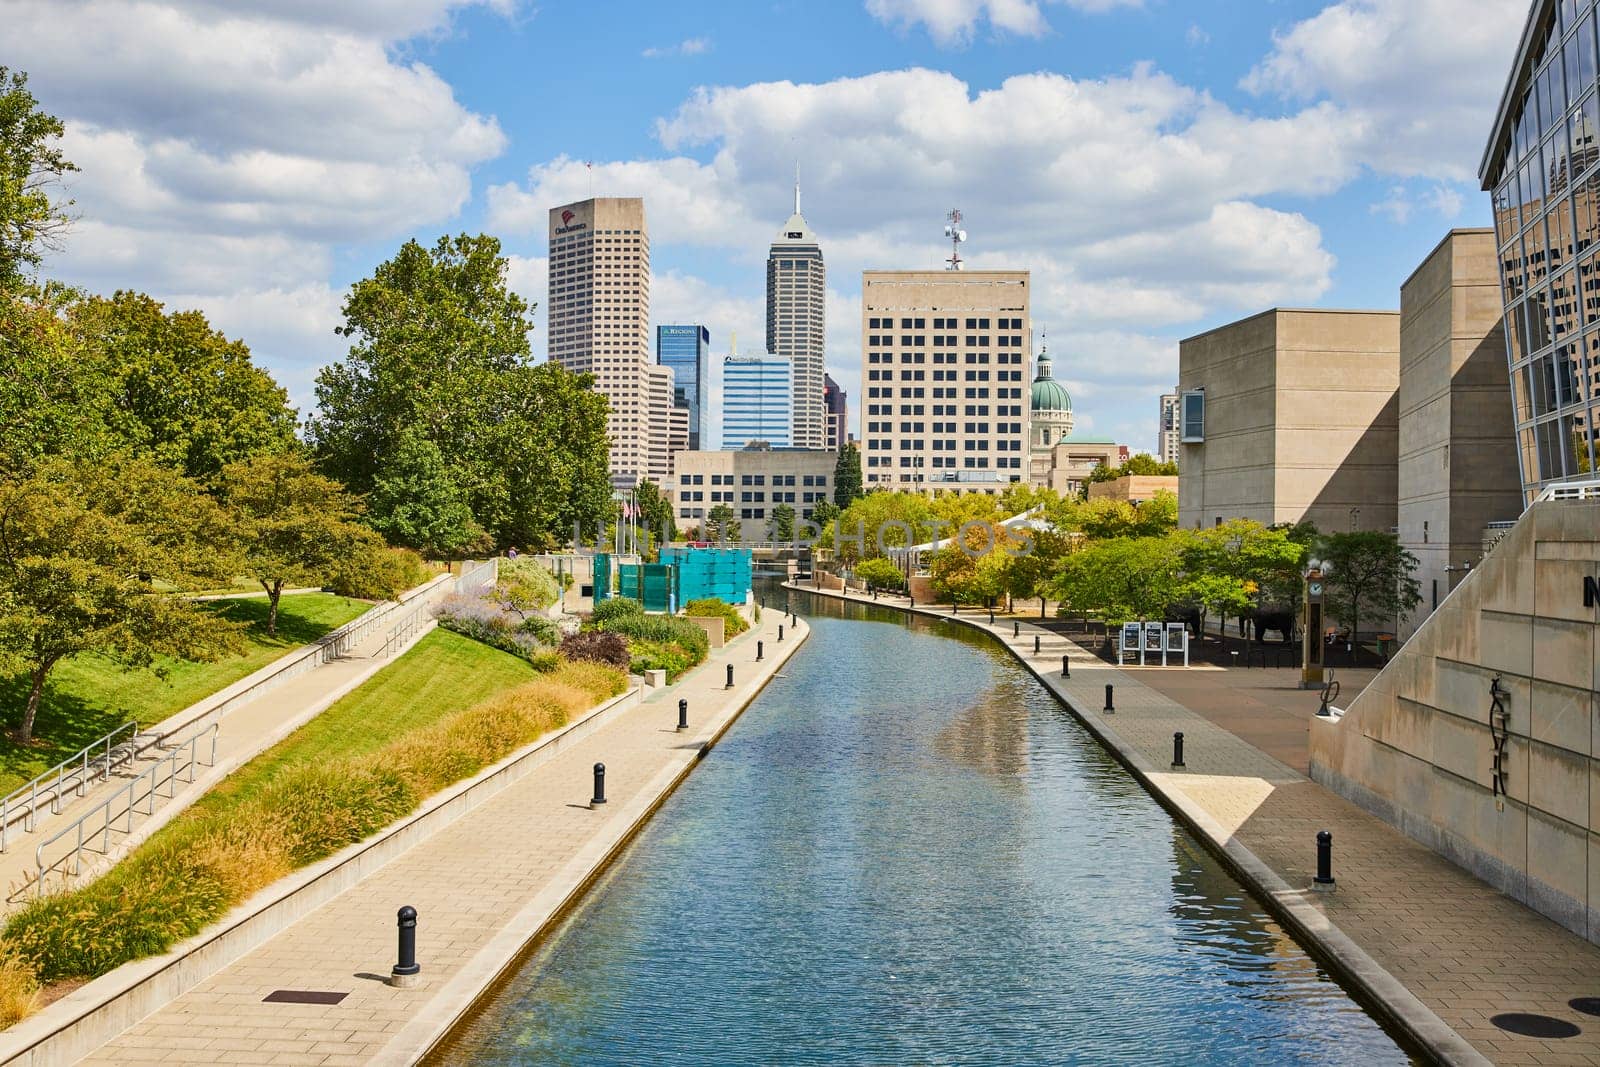 Sunny Urban Canal Scene with Indianapolis Skyline by njproductions